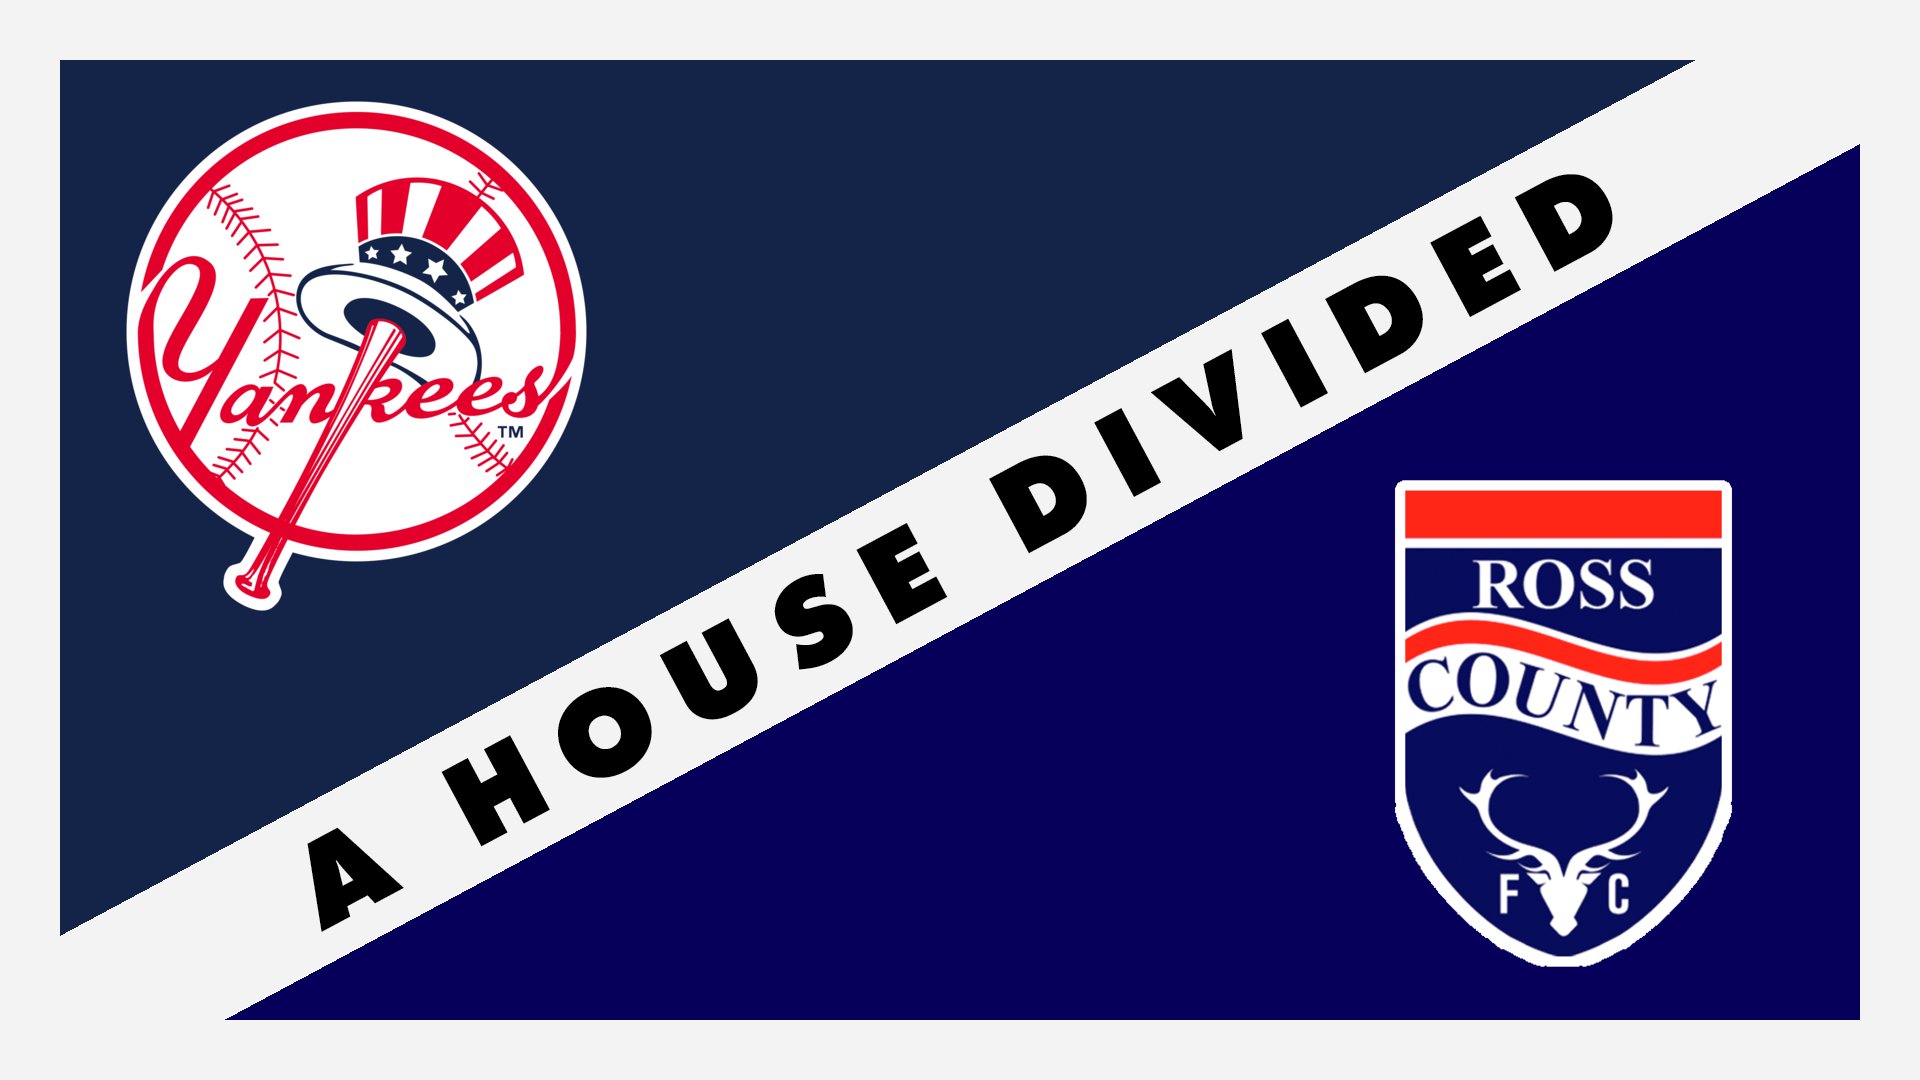 A House Divided Wallpapers